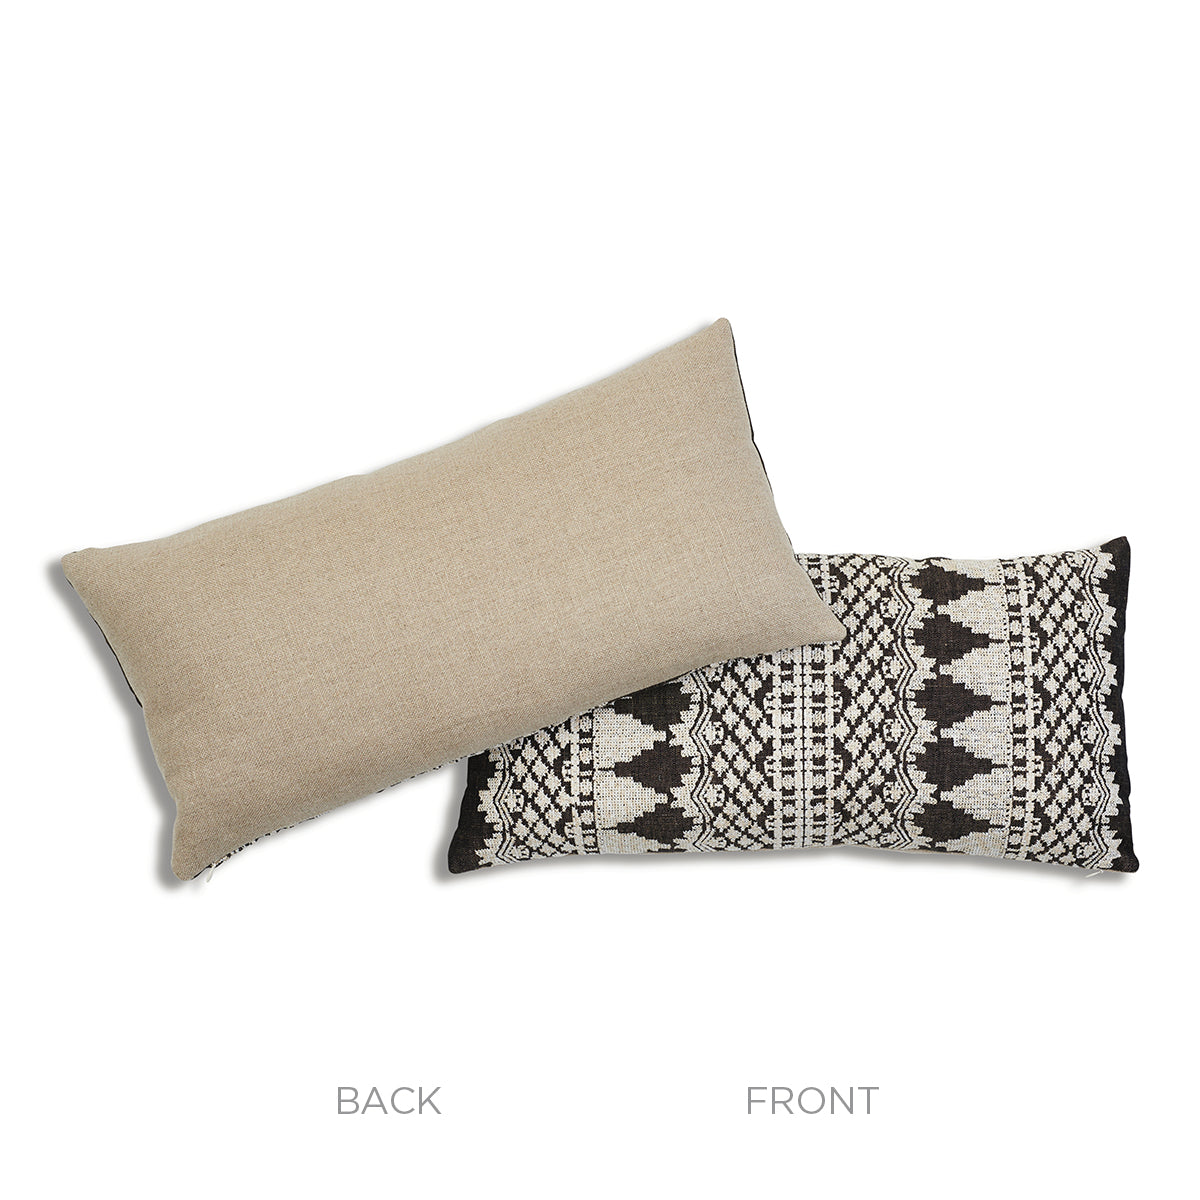 Wentworth Embroidery Pillow | Carbon